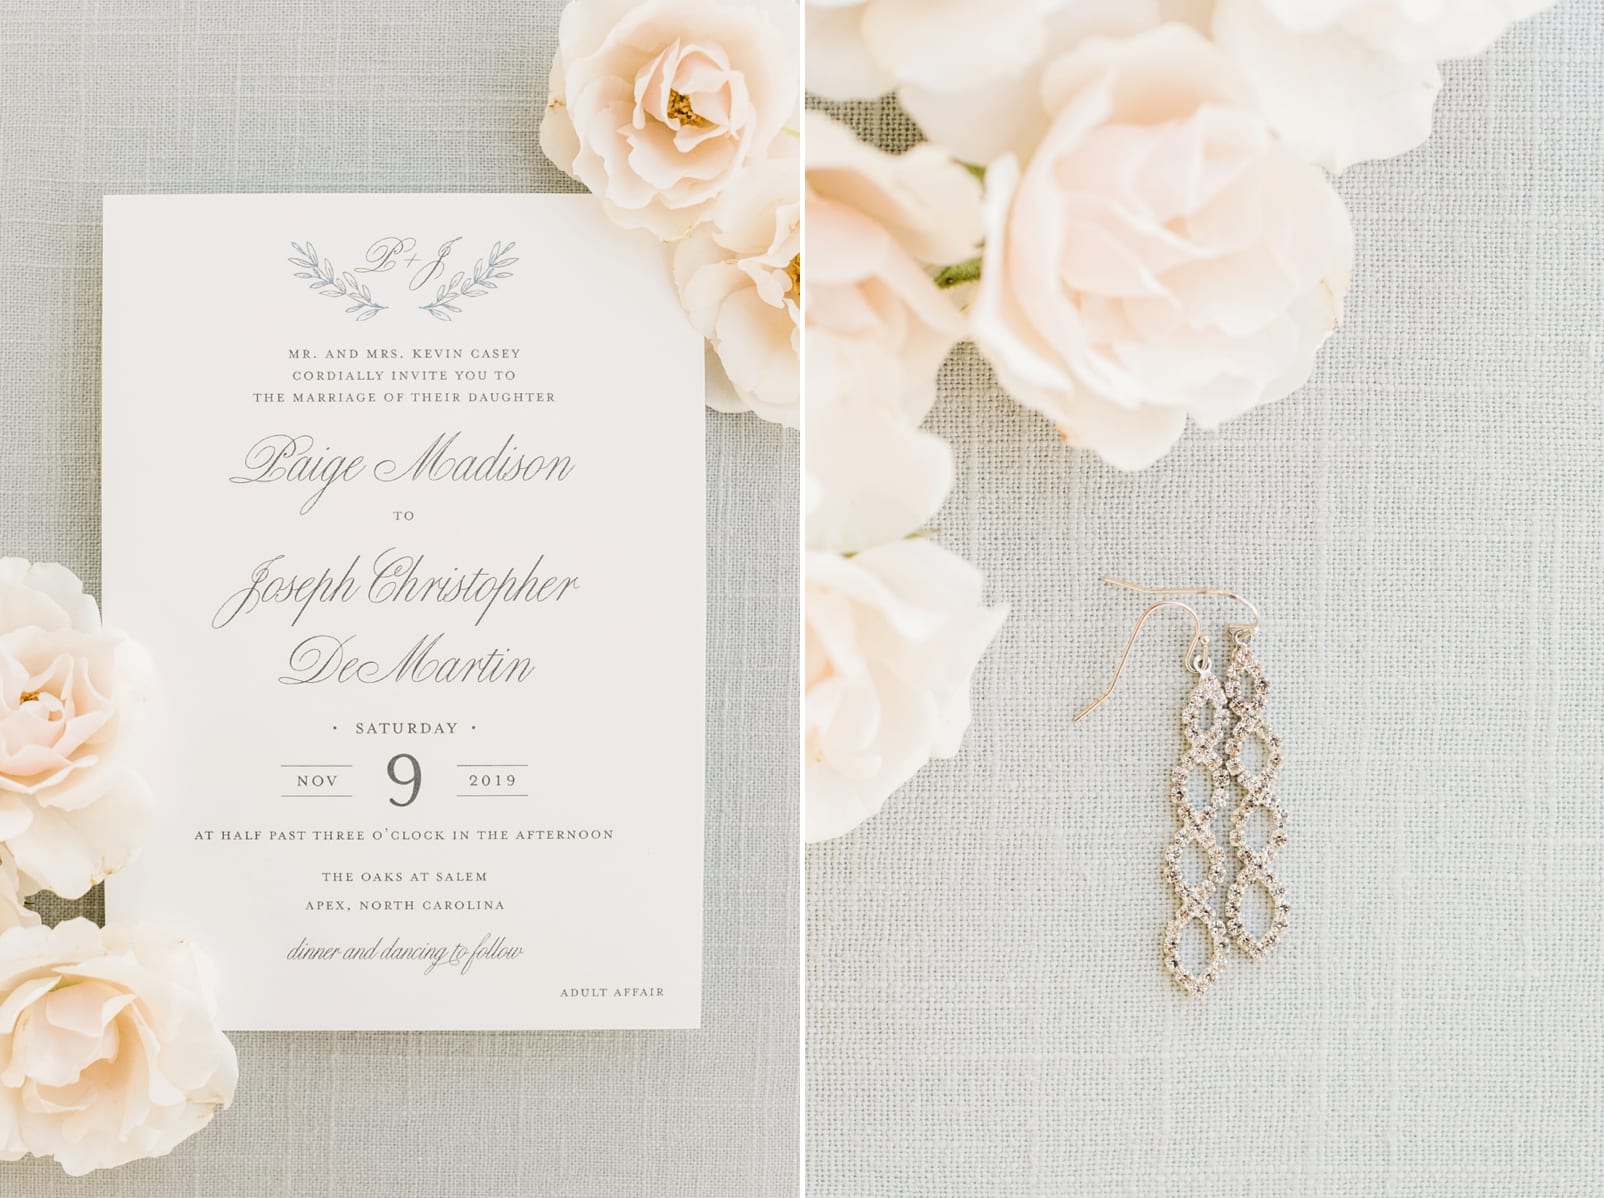 Raleigh wedding invitation suite and bridal earrings styled with white flowers photo